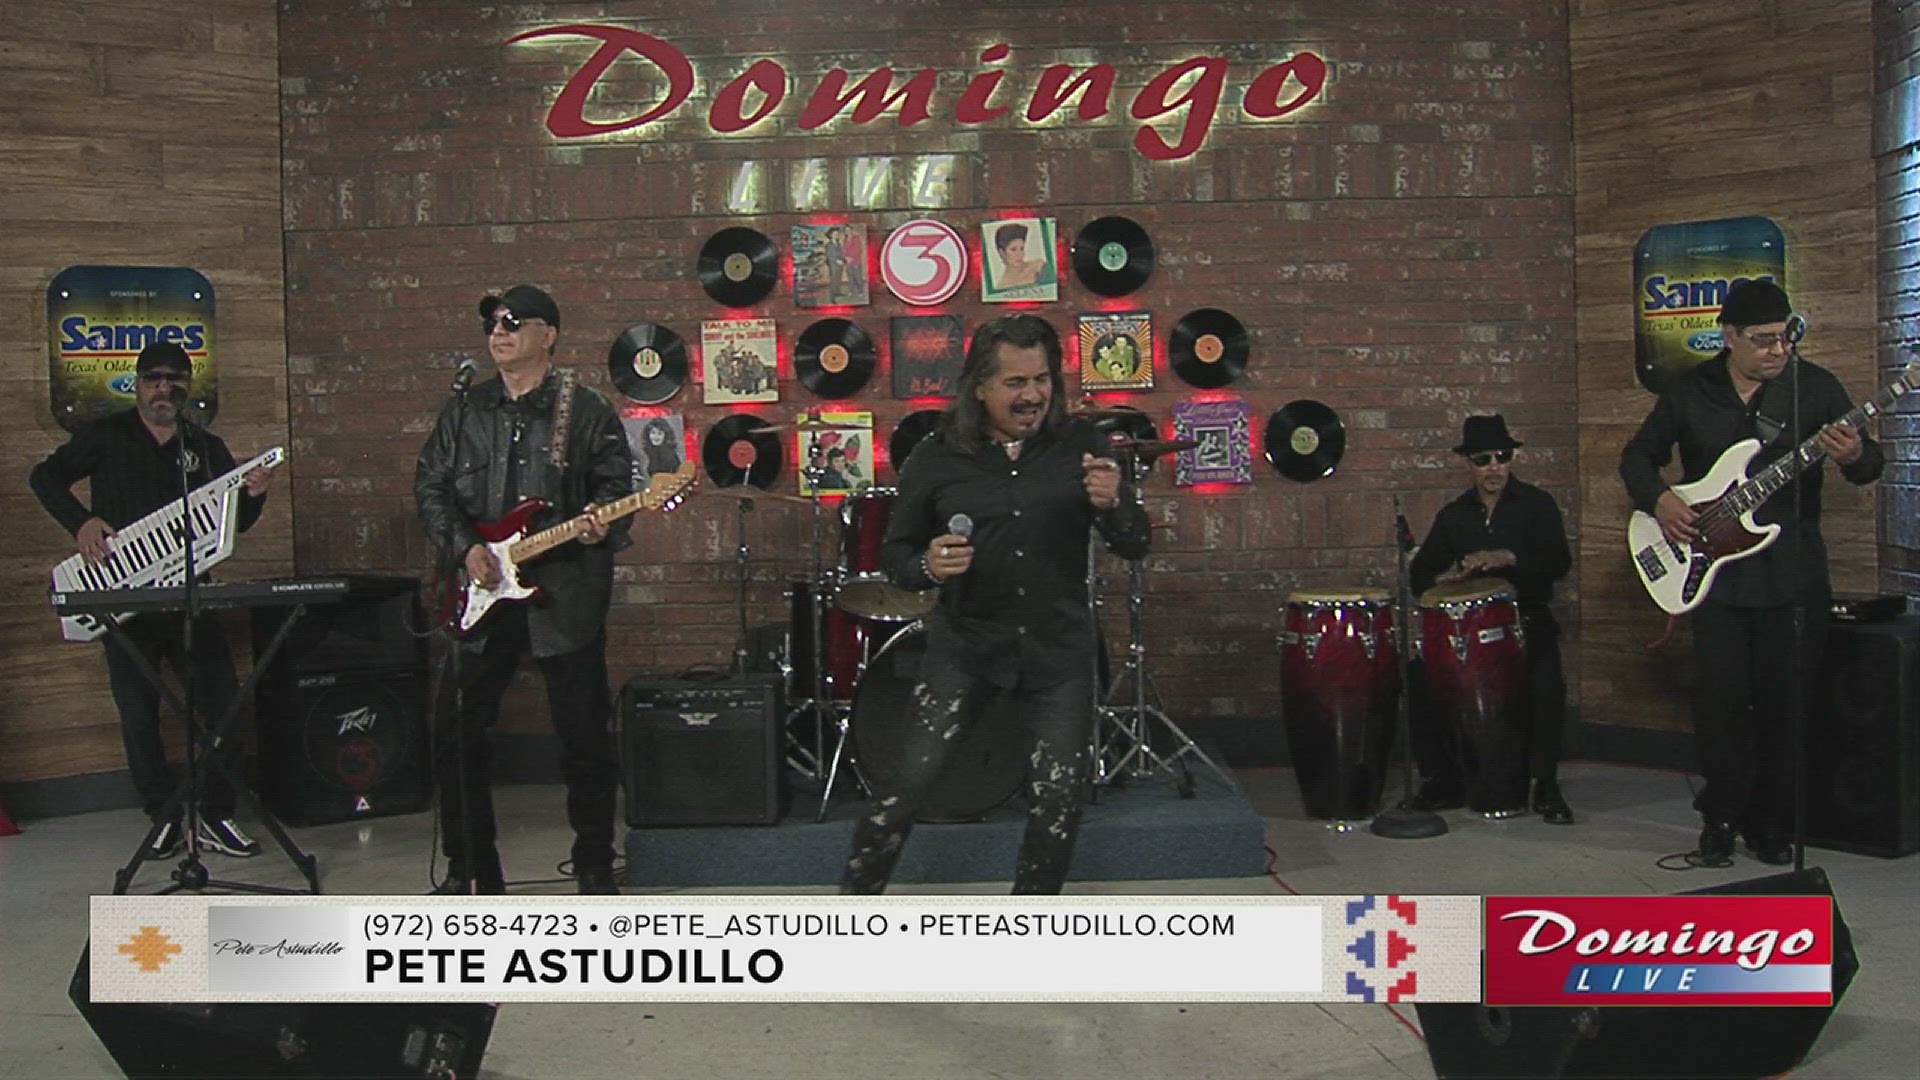 Pete Astudillo and several generations of his backing band joined us on Domingo Live to perform his iconic single "Porque Le Gusta Bailar Cumbia."